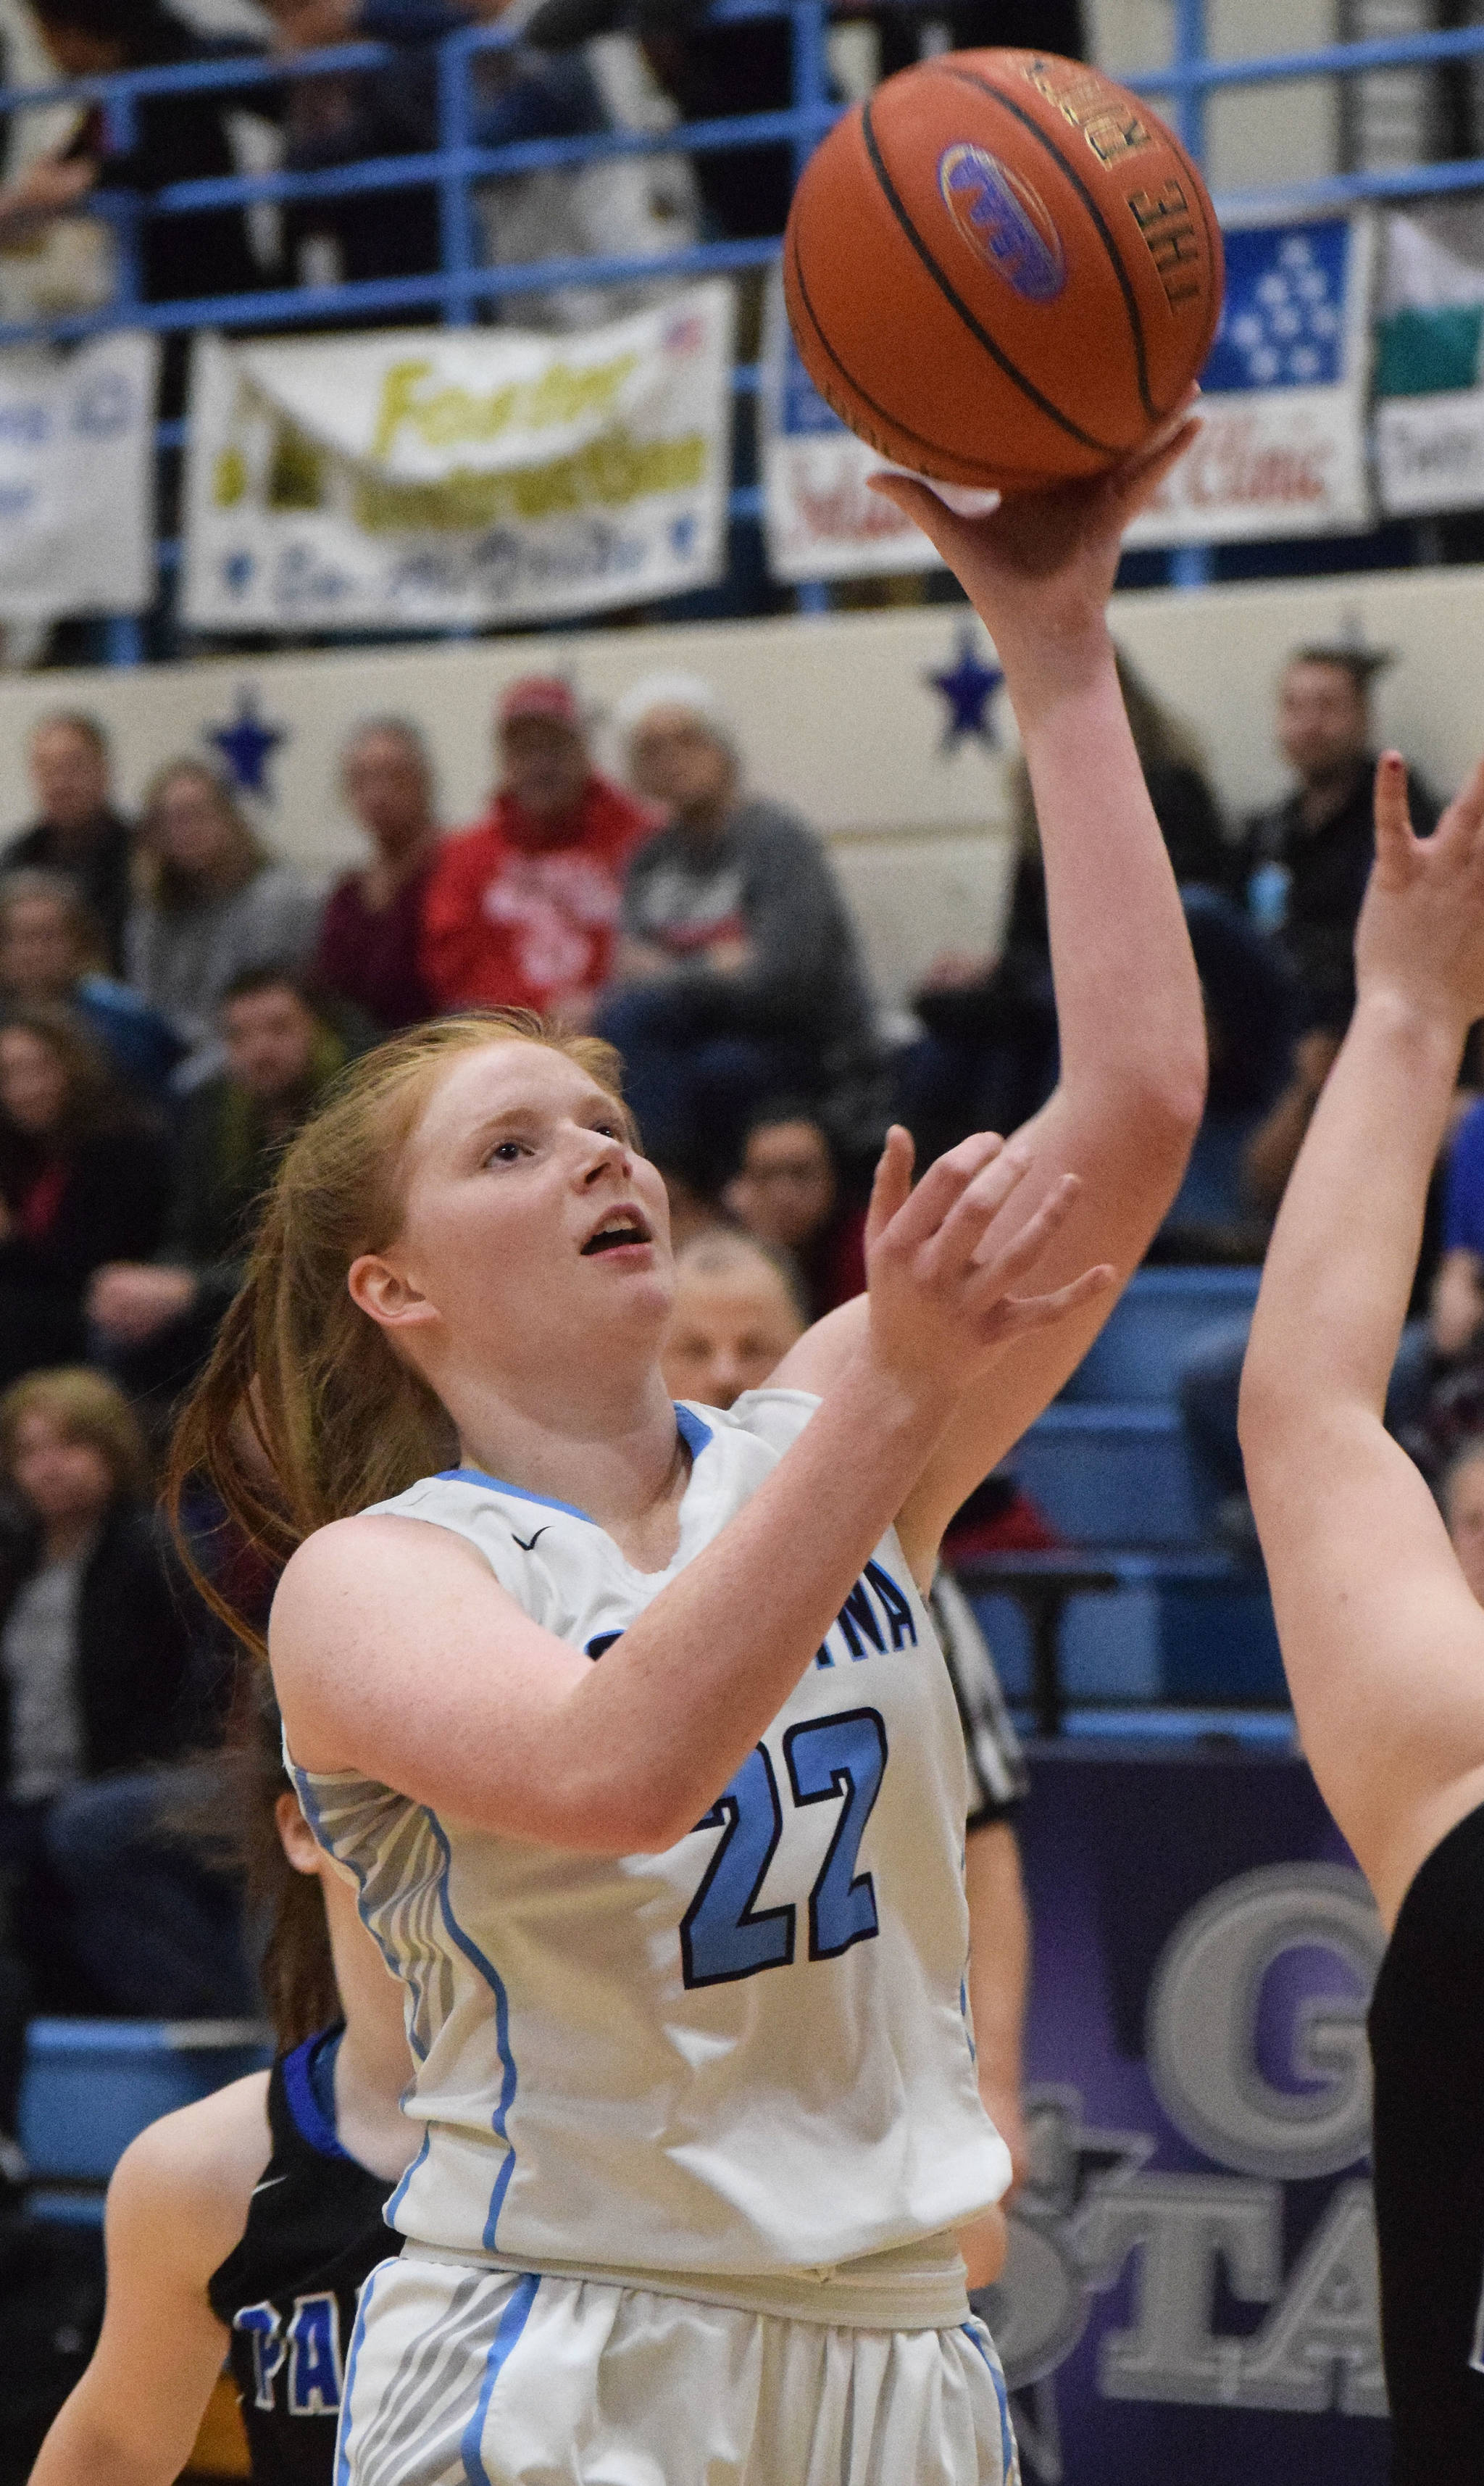 Soldotna’s Kianna Holland takes a shot Friday night in the Northern Lights Conference semifinals against Palmer at Soldotna High School. (Photo by Joey Klecka/Peninsula Clarion)